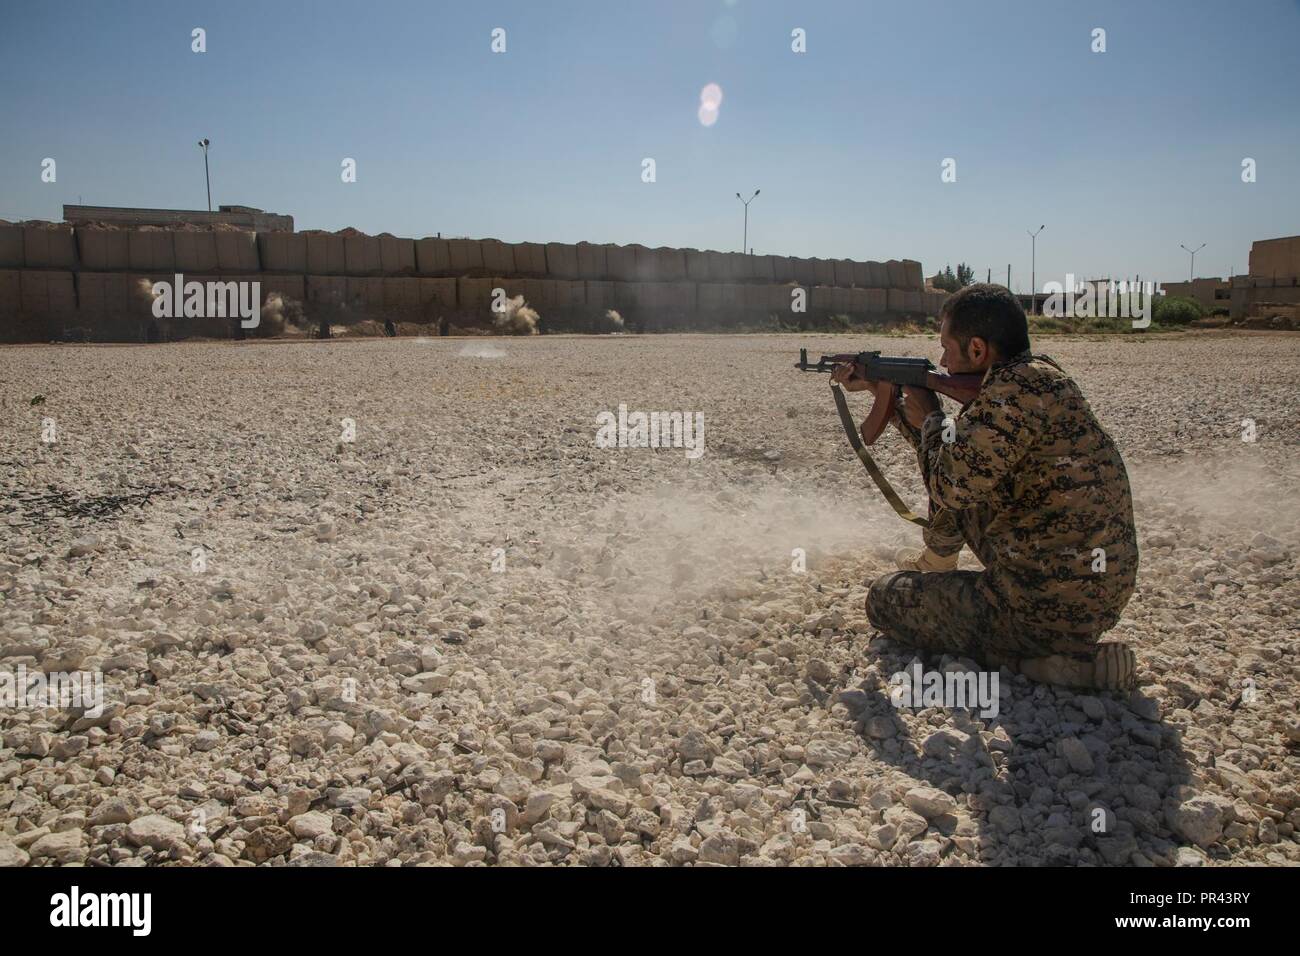 A Syrian Arab trainee fires his rifle at a marksmanship range in Northern Syria, July 31 2017. The Syrian Democratic Forces continue to recruit and train Syrians of all ethnicities who are passionate about joining the counter-ISIS fight to eliminate terror from their home. The SDF have proven themselves able to conduct clearance operations while respecting the Law of War in their liberation of Raqqah. Stock Photo